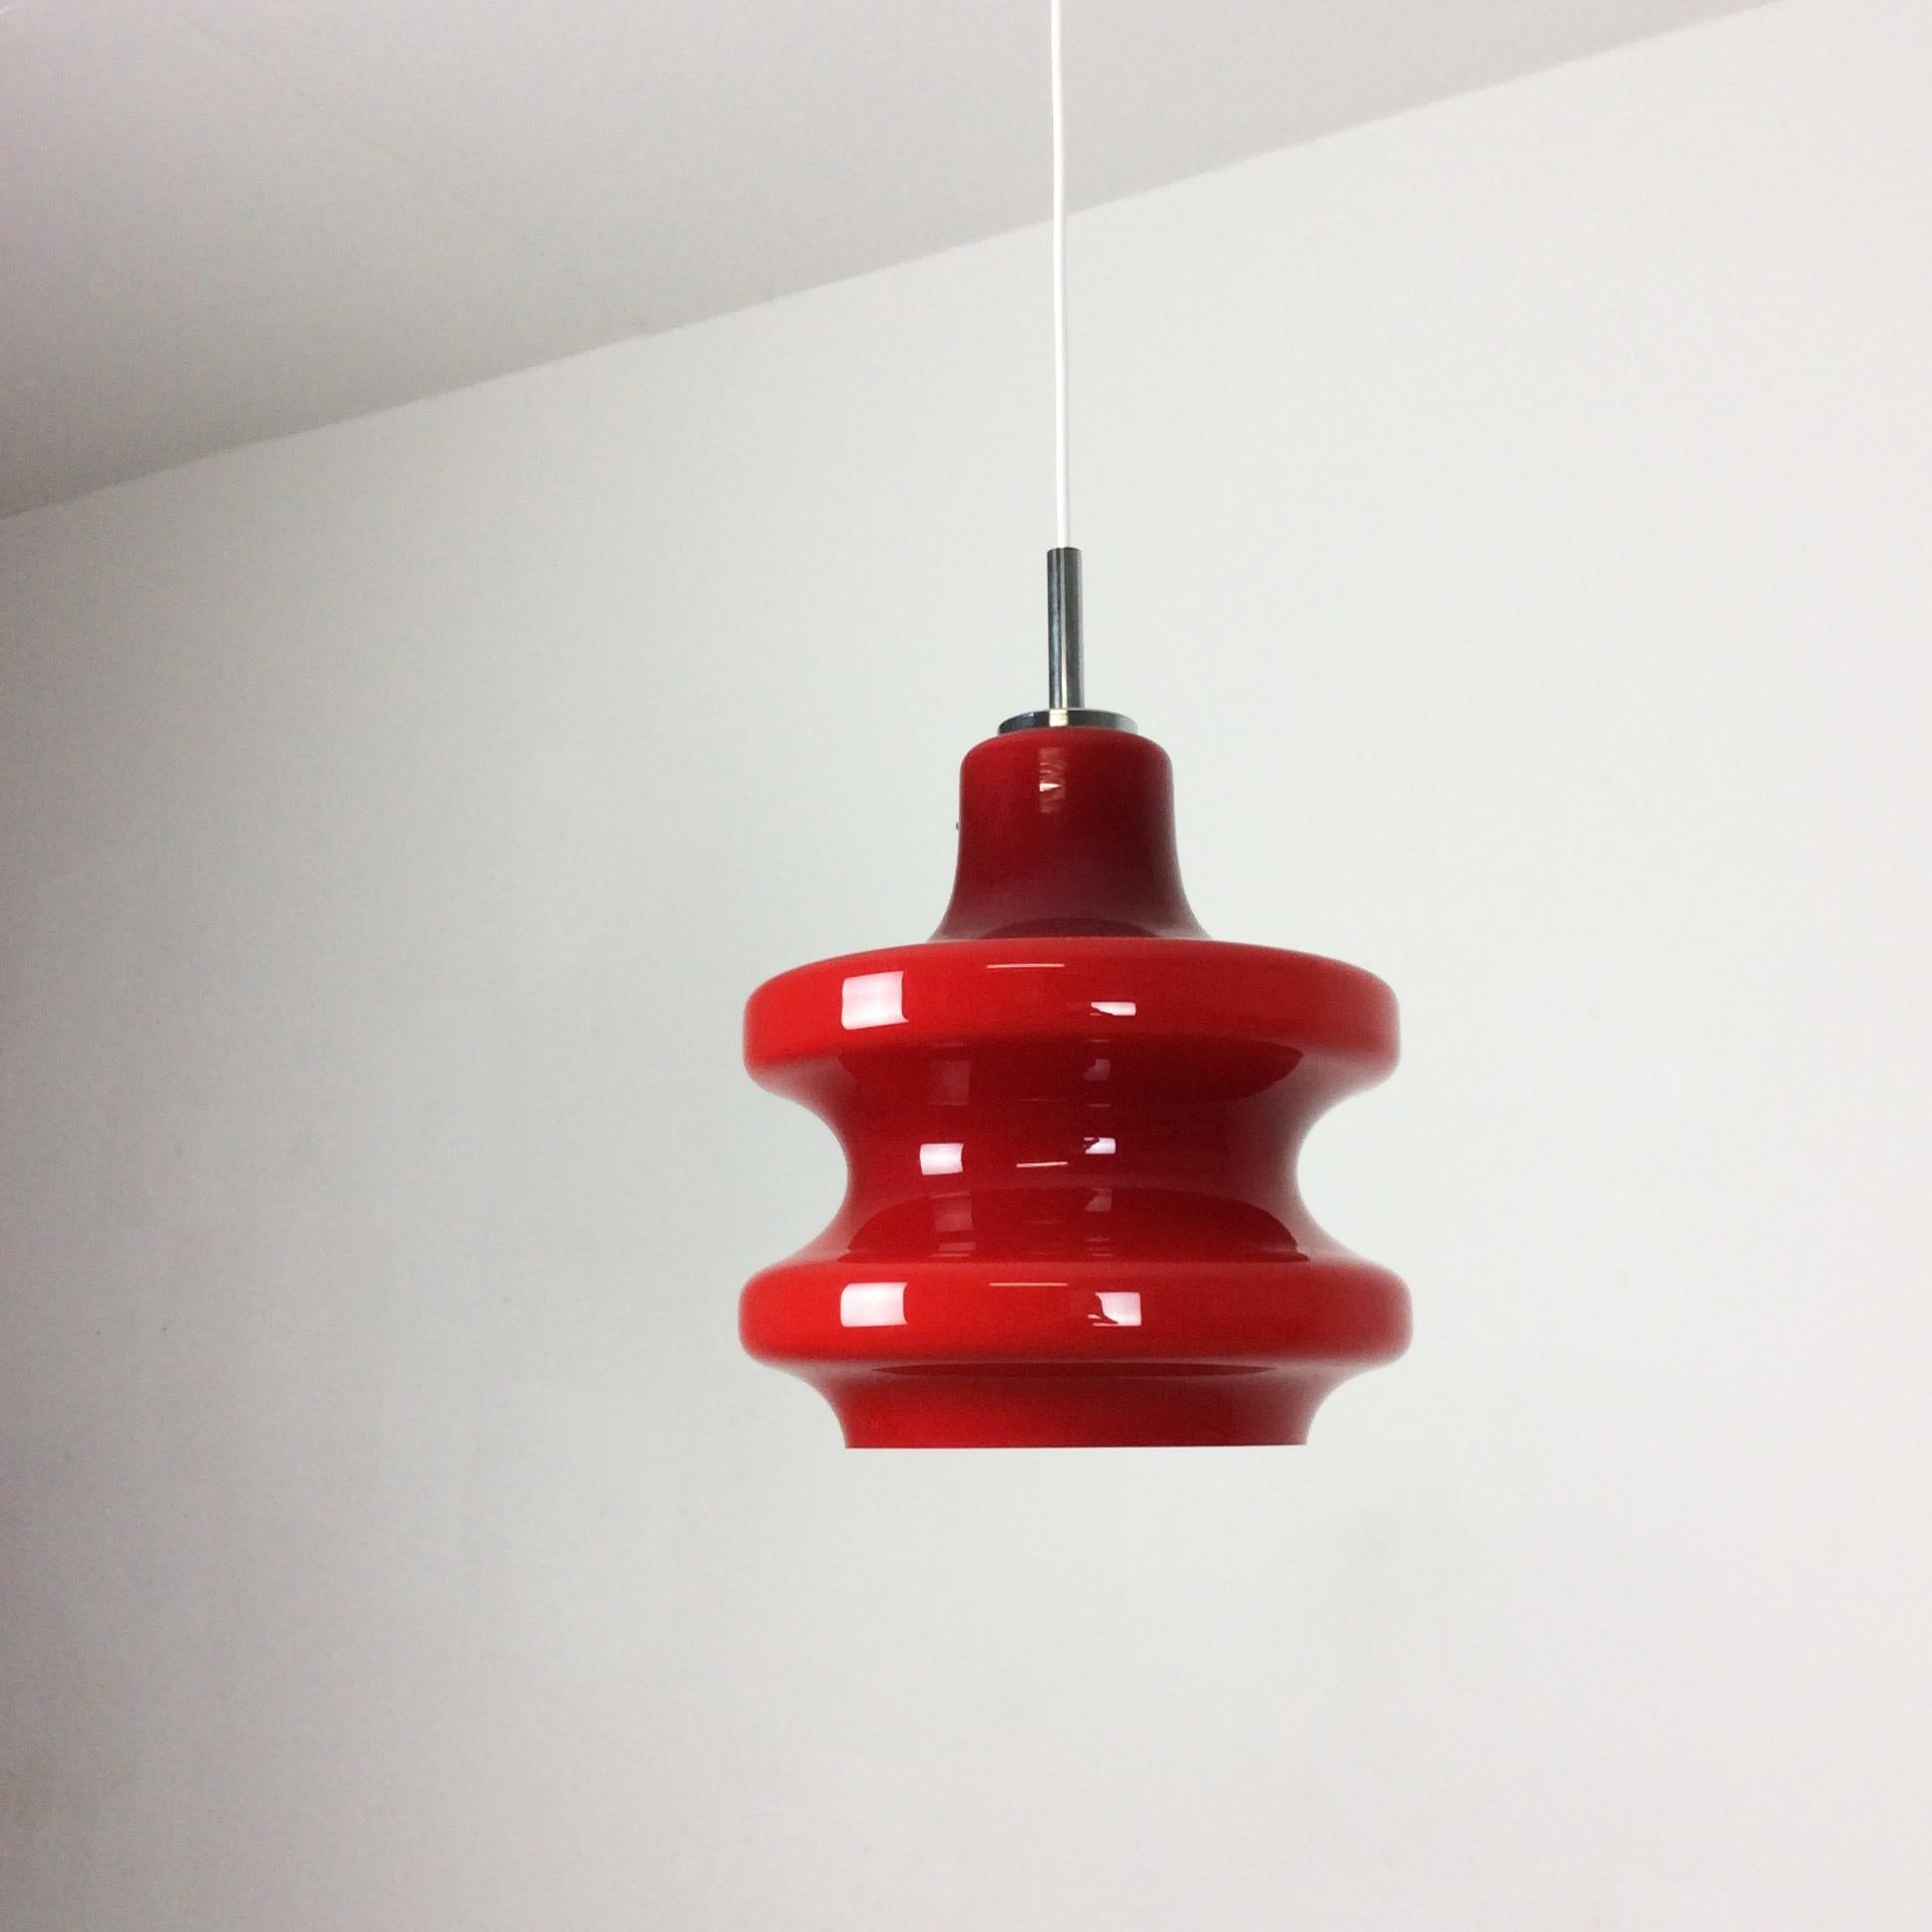 Original German Red Opal Glass Hanging Light, Made by Peill & Putzler, Germany In Good Condition For Sale In Kirchlengern, DE